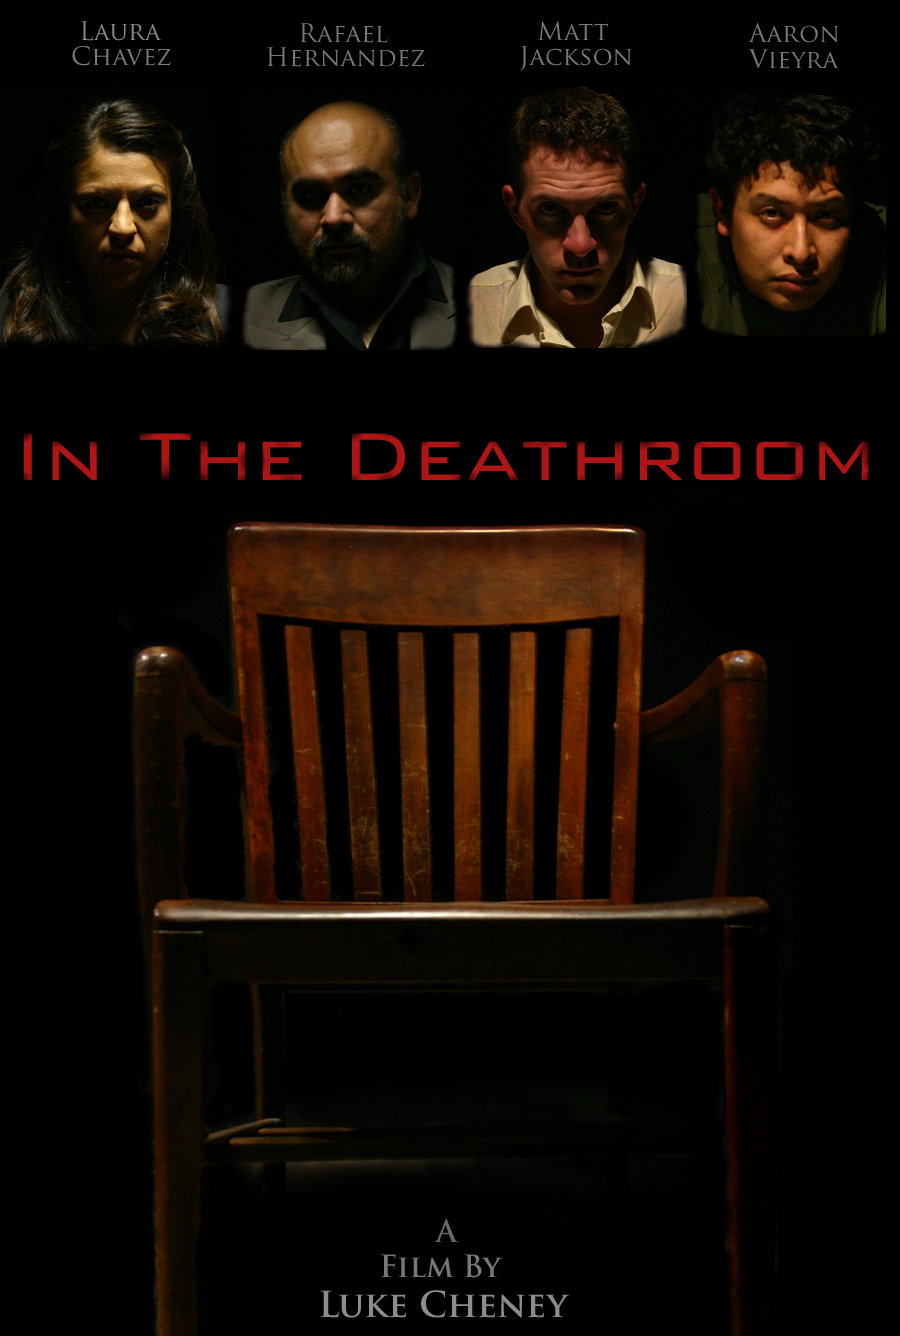 In the Deathroom